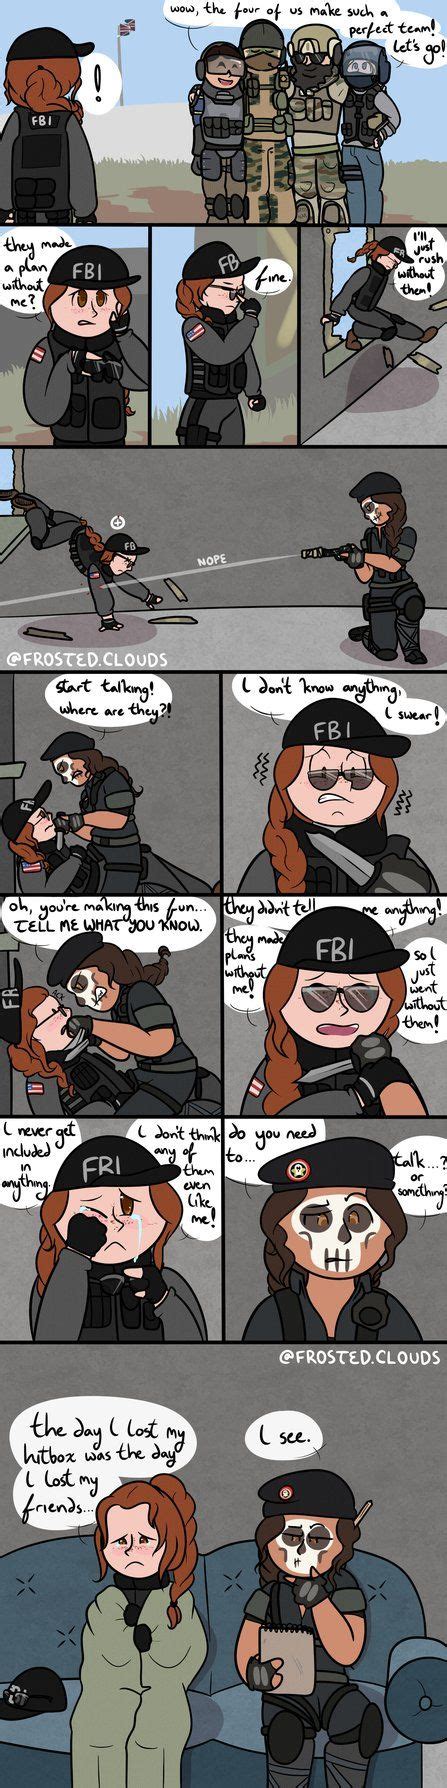 Ash Needs A Friend By Frostedclouds Fun Comics Rainbow Six Siege Anime